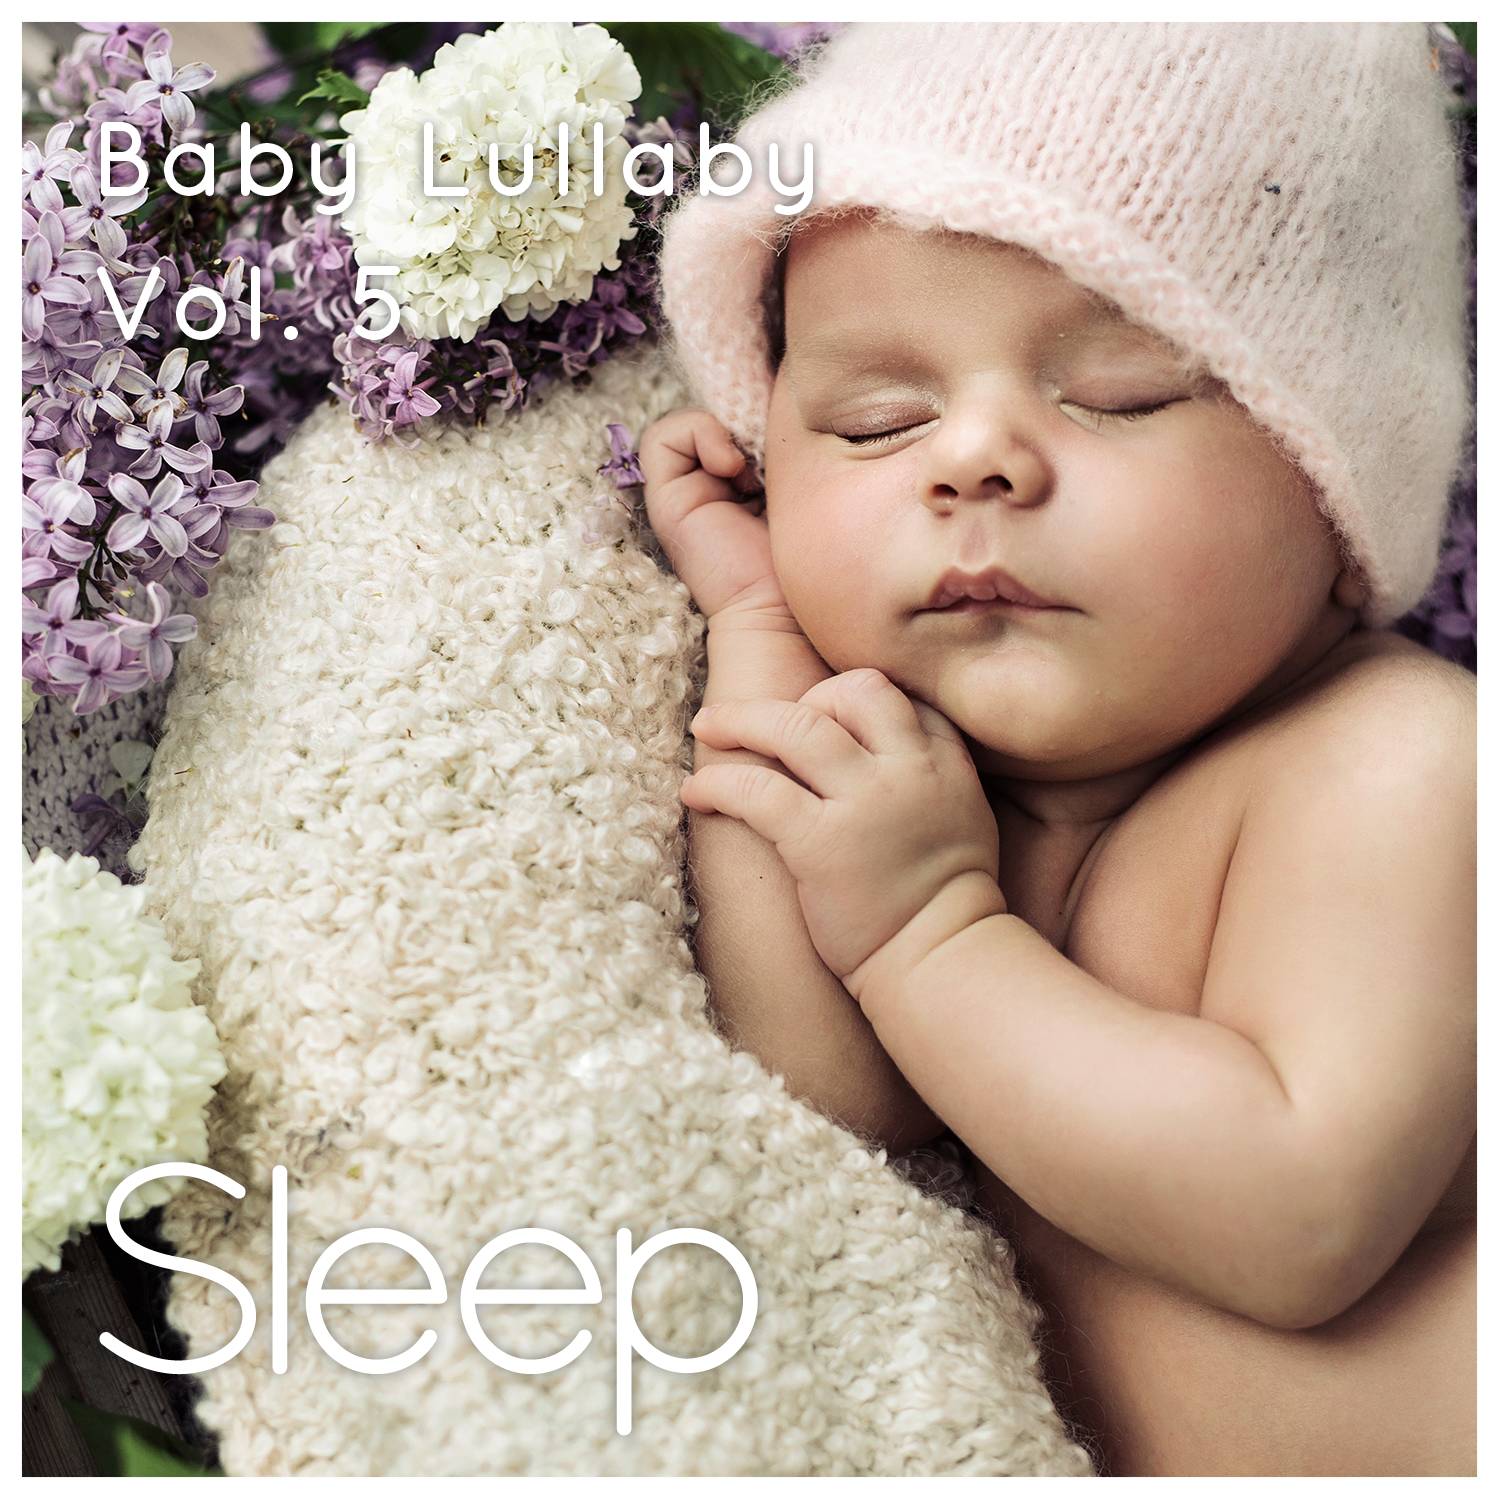 Baby Sleep Ambient Lullaby, Pt. 24